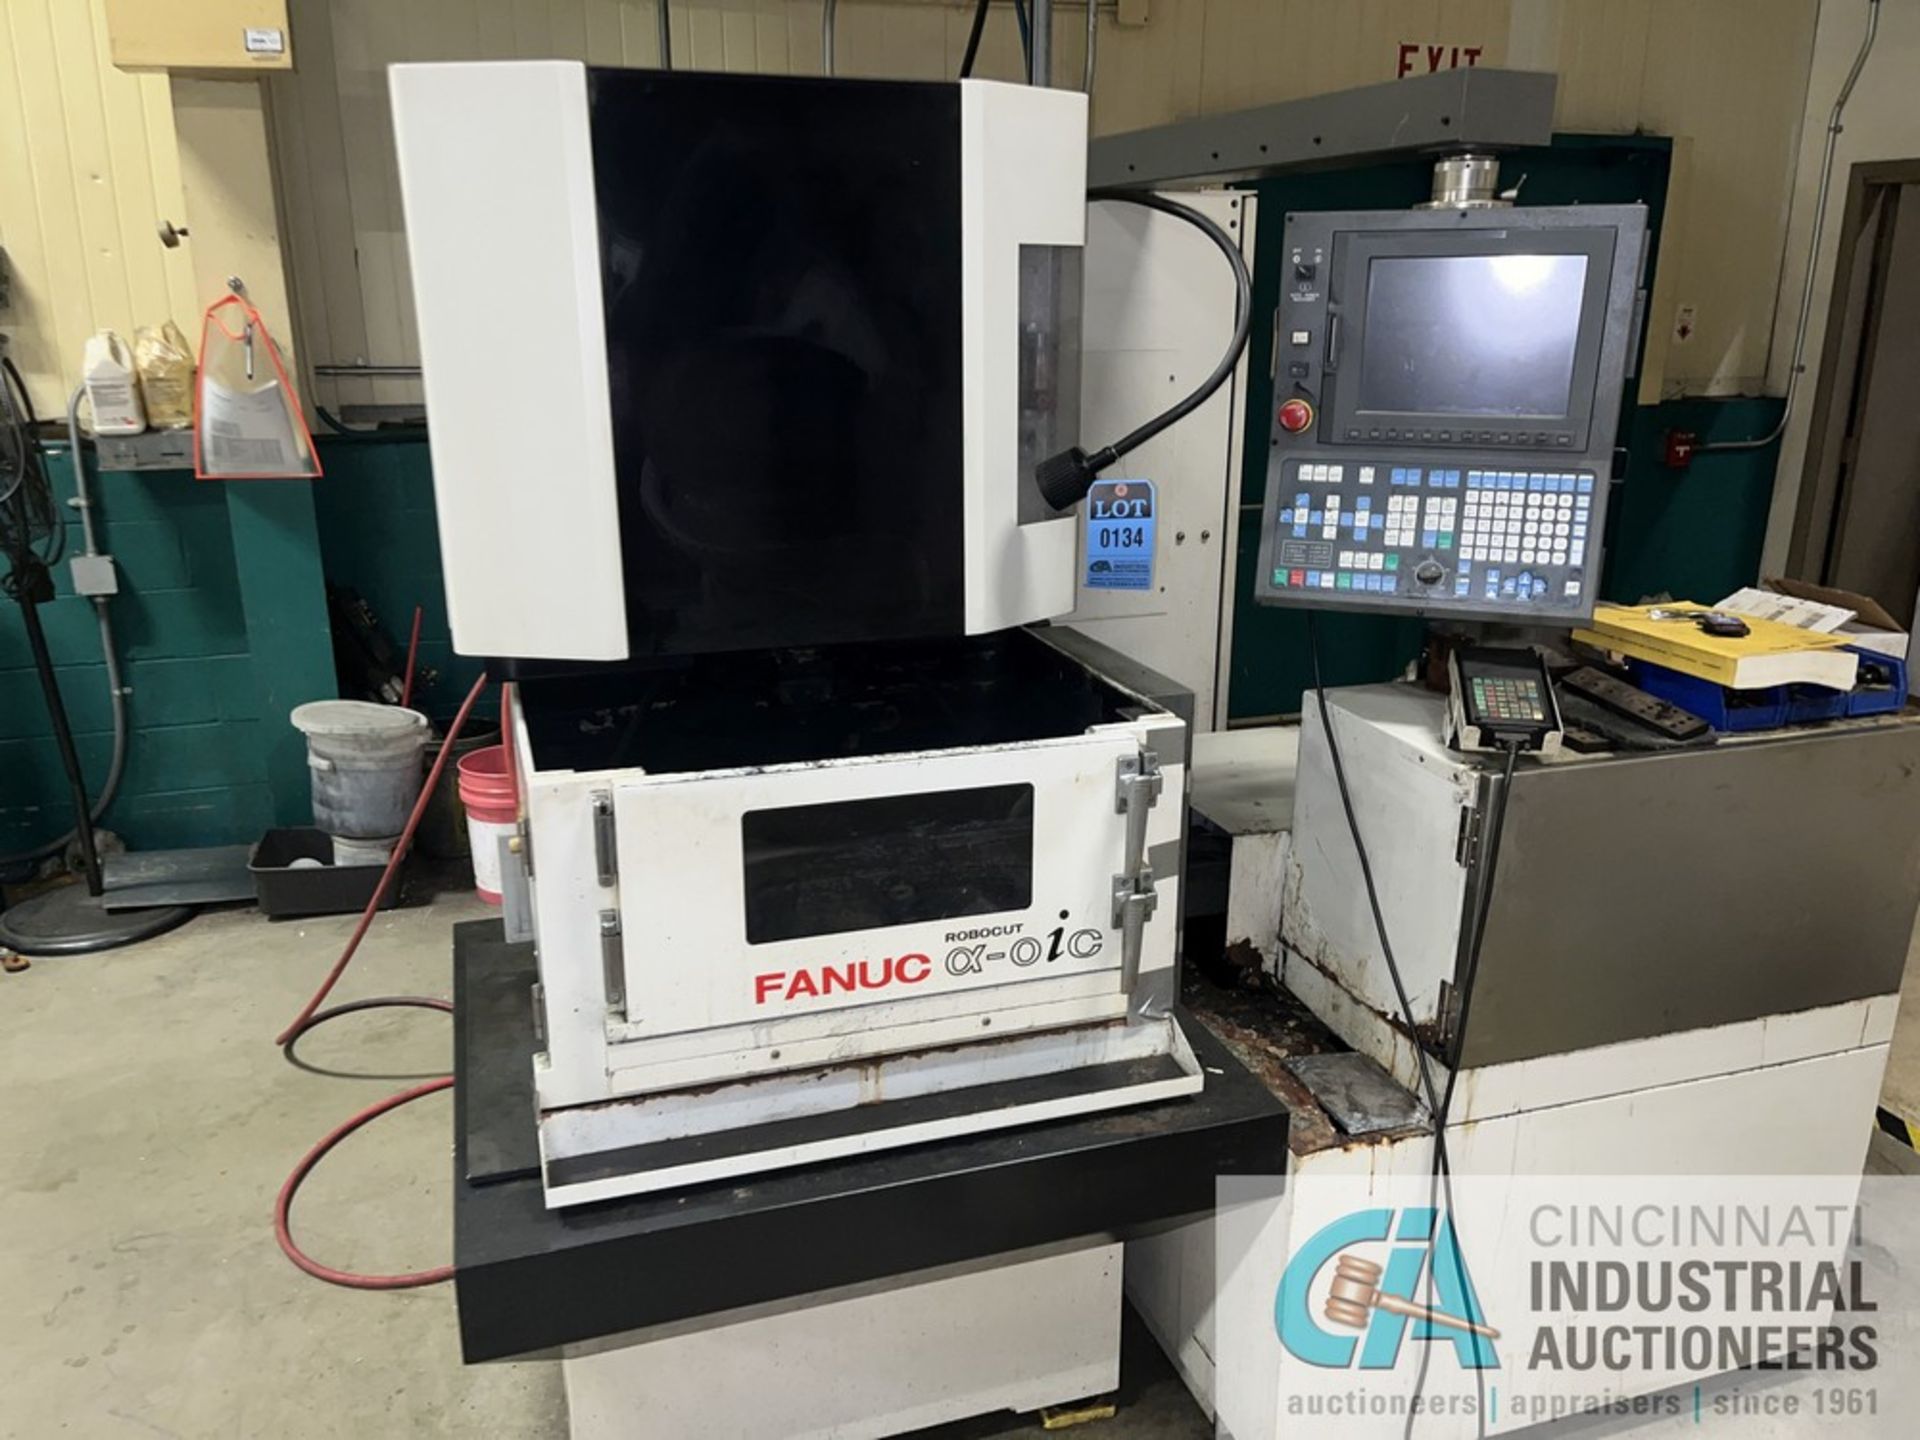 FANUC MODEL ROBOCUT A-OiC CNC WIRE EDM; S/N 043C0085 (NEW 2004), TABLE AREA 21" X 14", X-AXIS 12.5", - Image 2 of 11